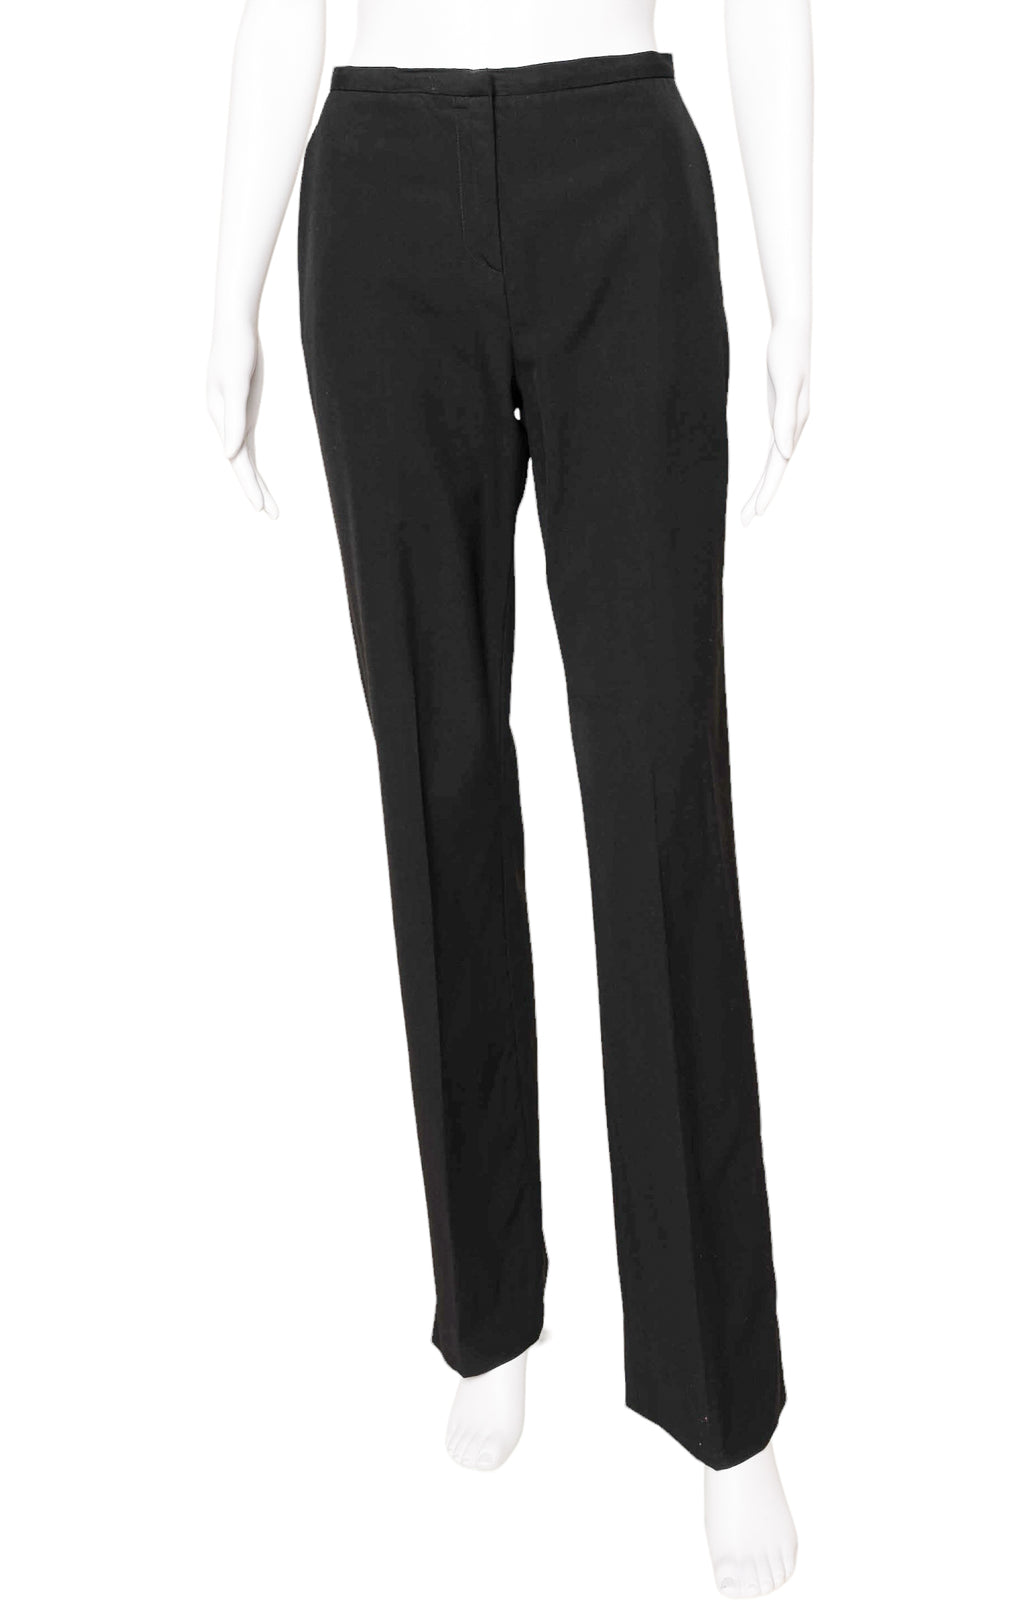 NARCISO RODRIGUEZ Pants Size: IT 38 / Comparable to US 0-2